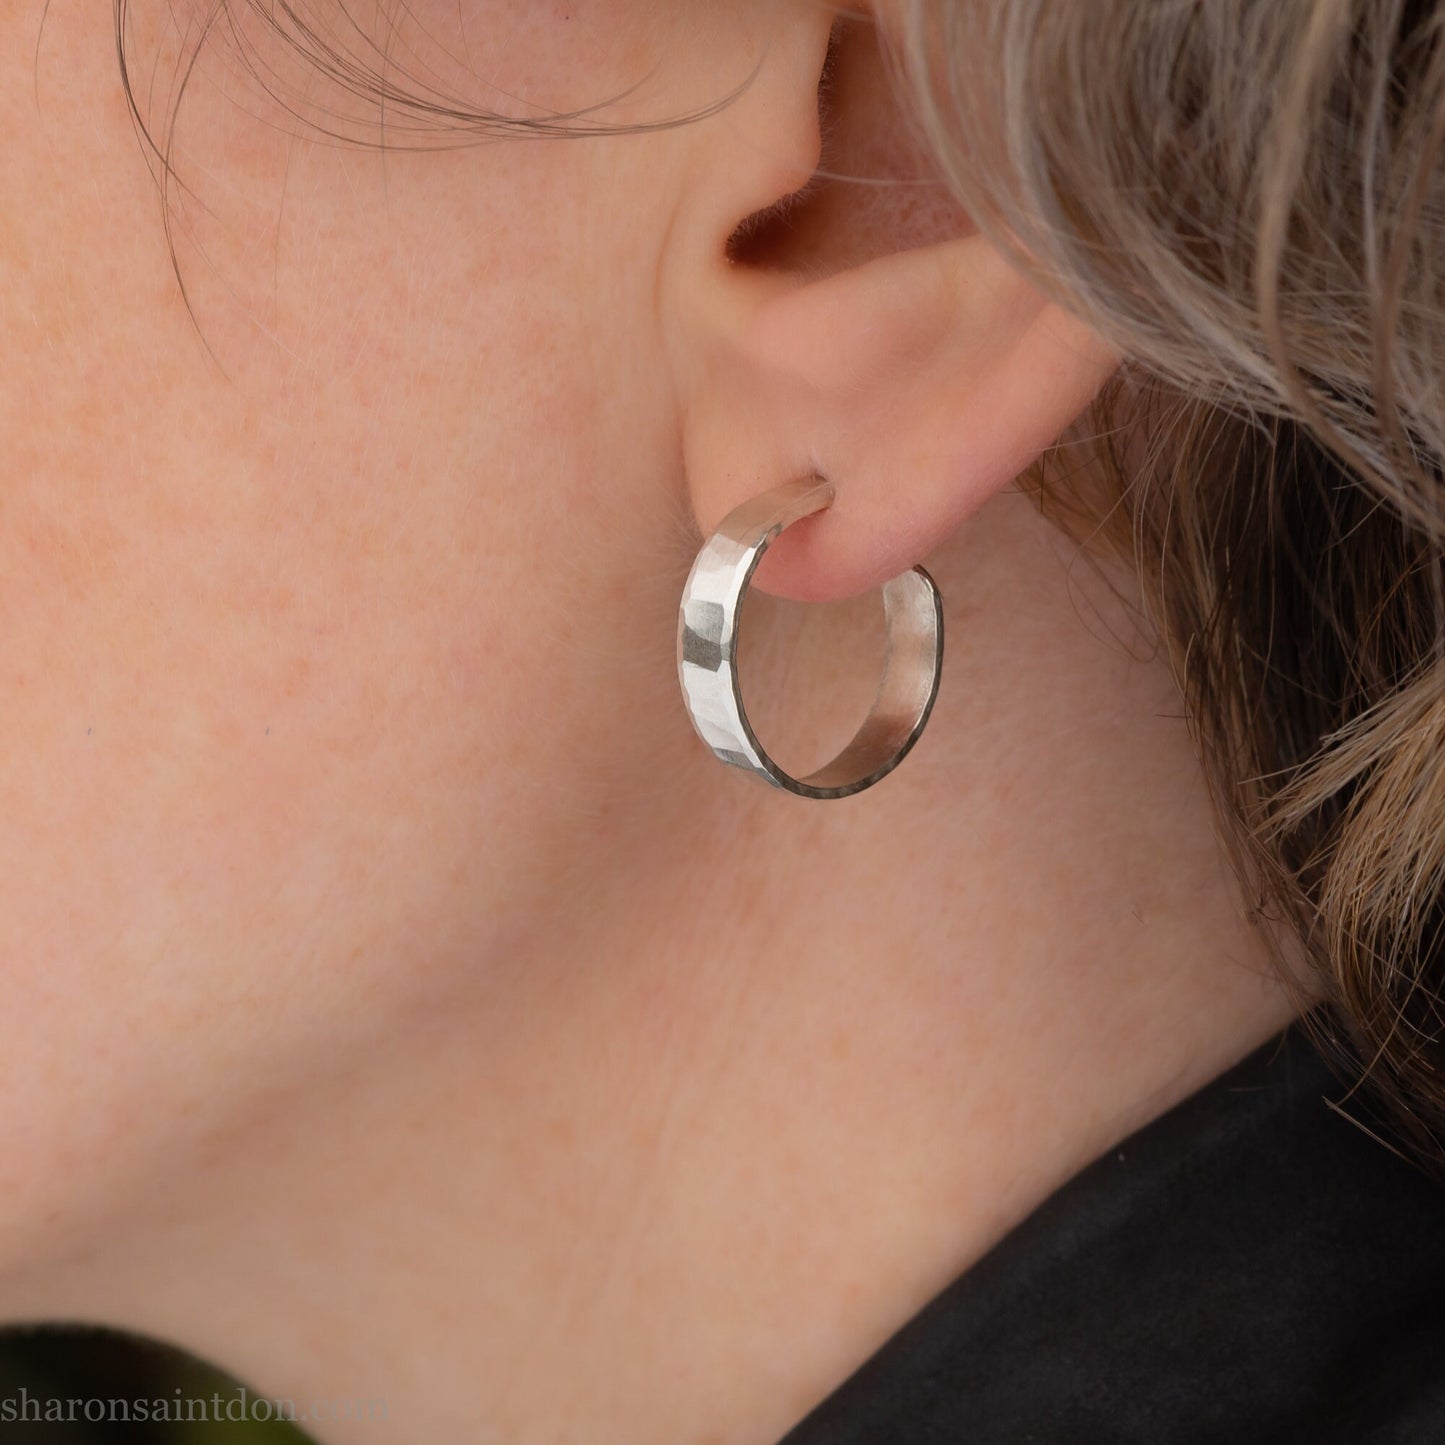 925 sterling silver hoop earrings handmade in North America by Sharon SaintDon. 18mm diameter round, 4mm wide, hammered texture, matte, brushed finish and silver posts and backs.